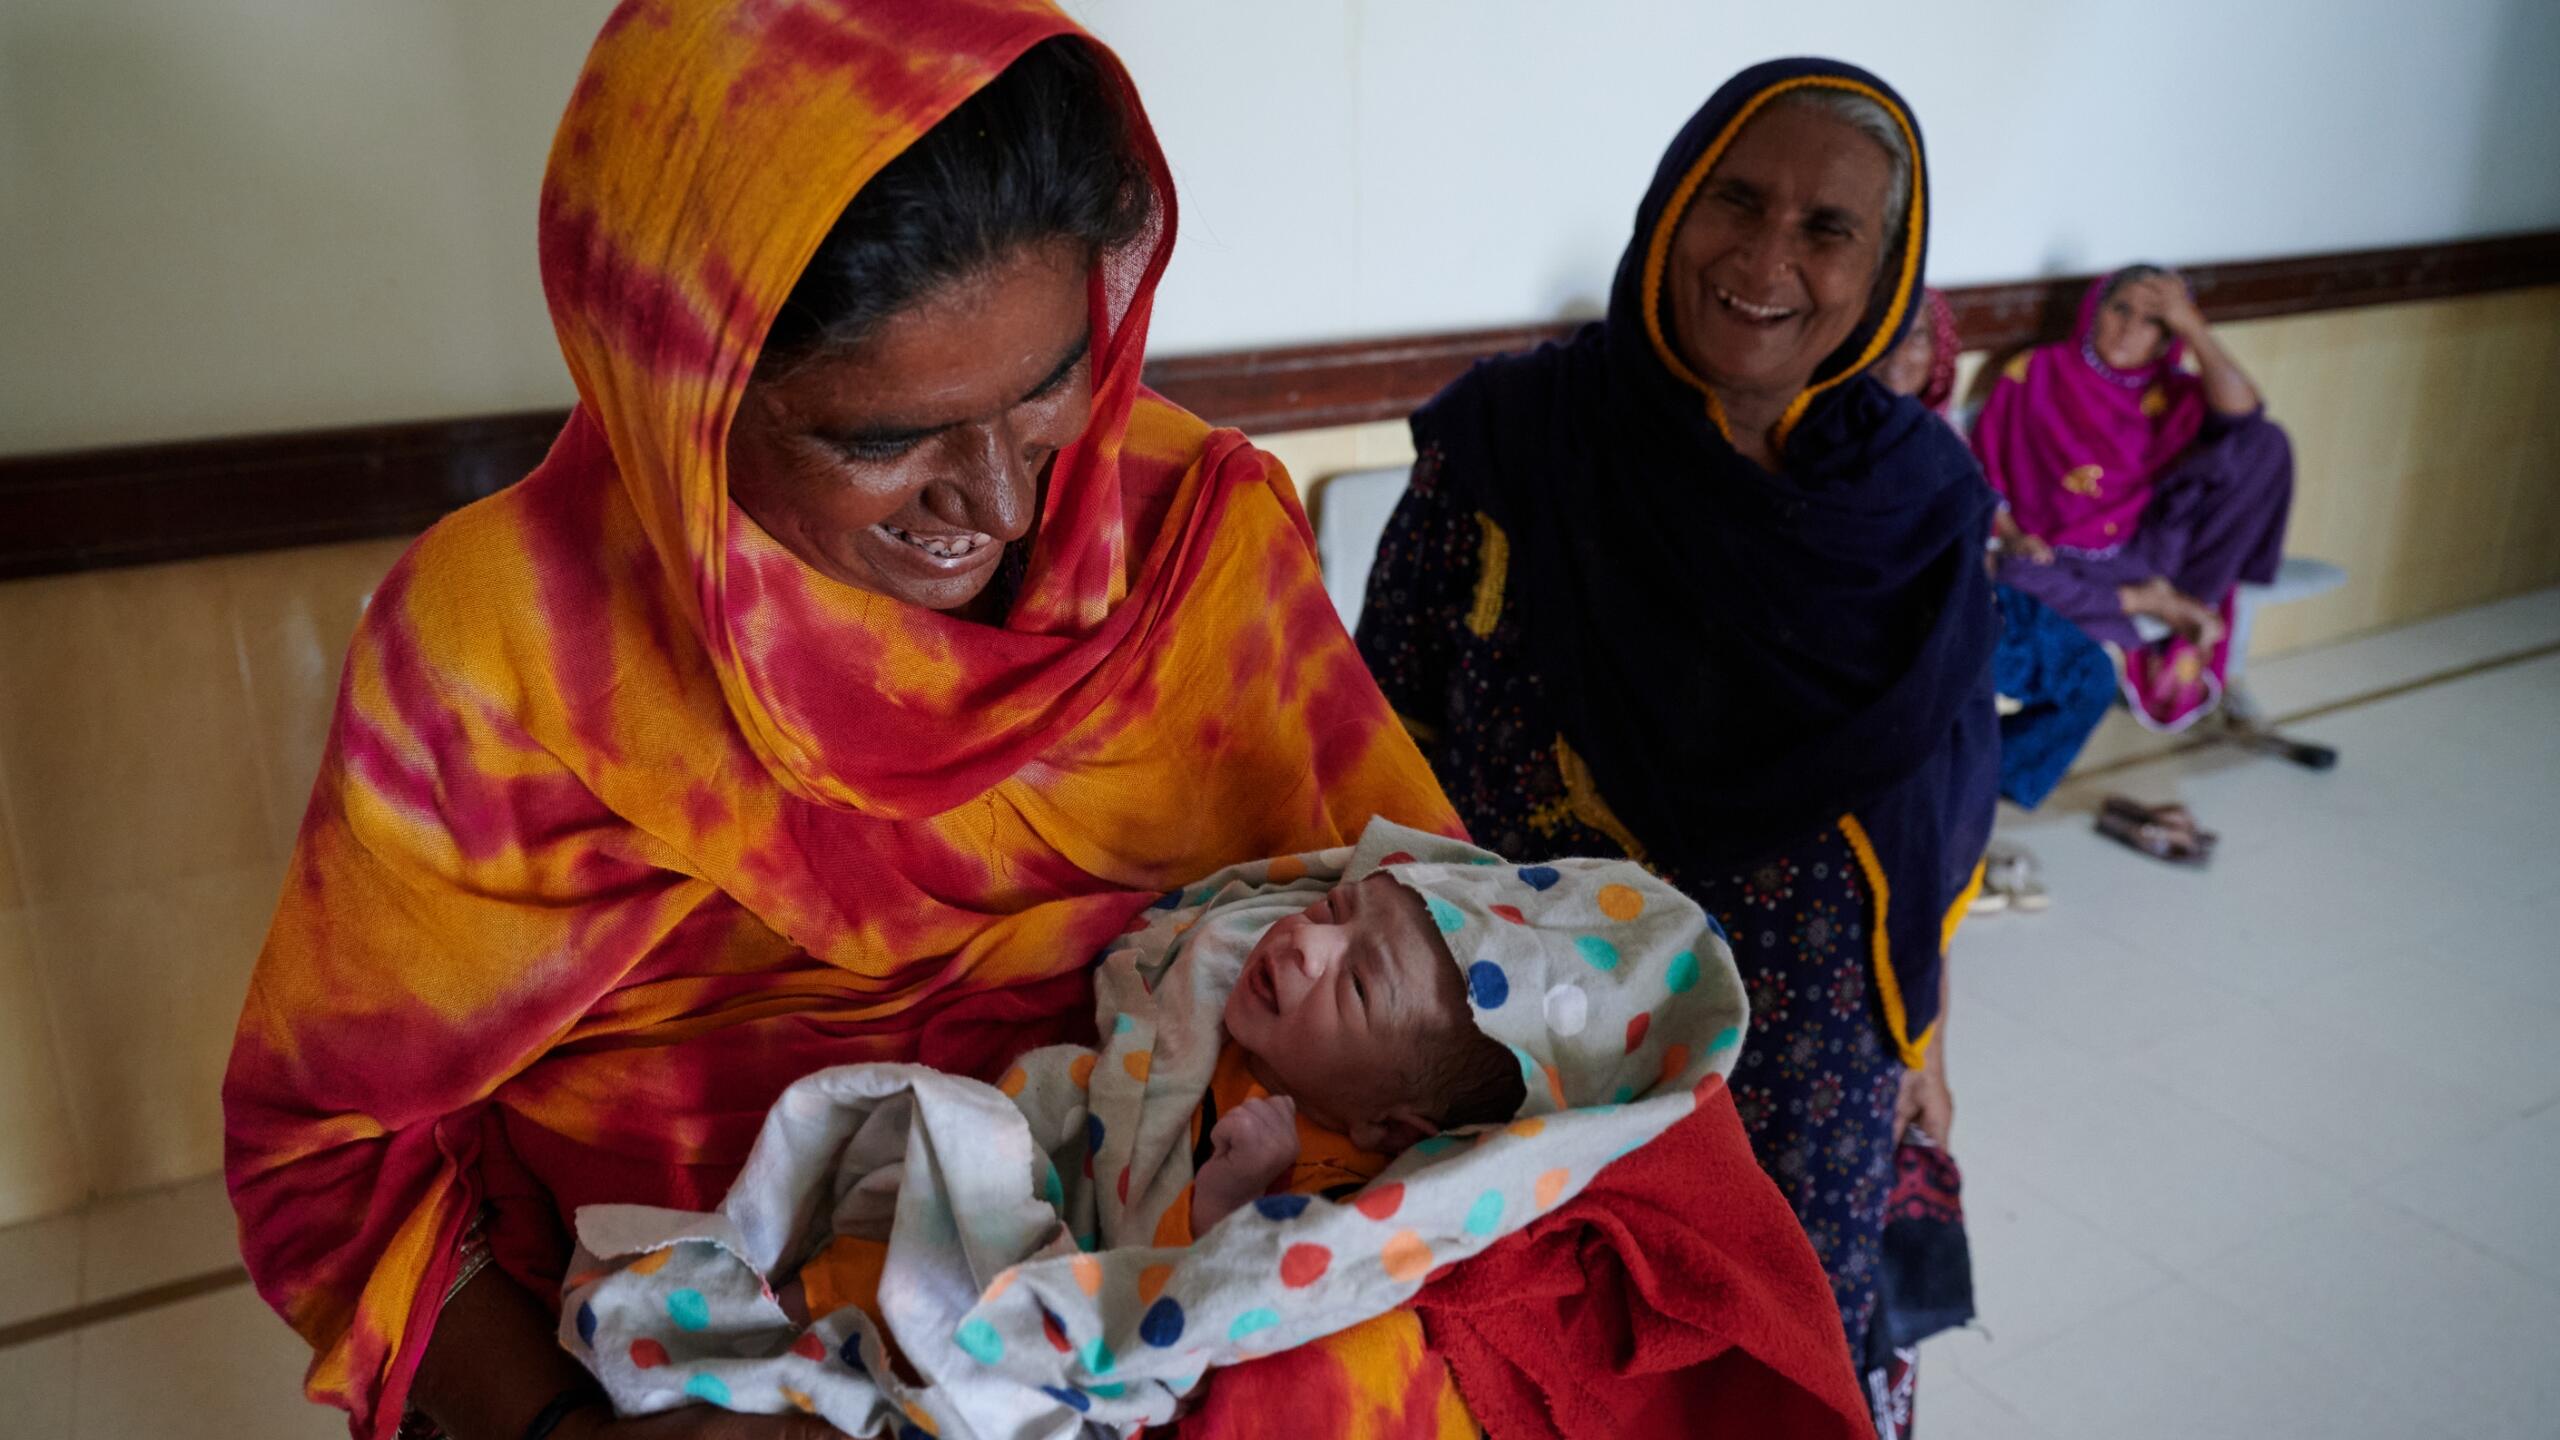 A woman smiles at her newborn child.